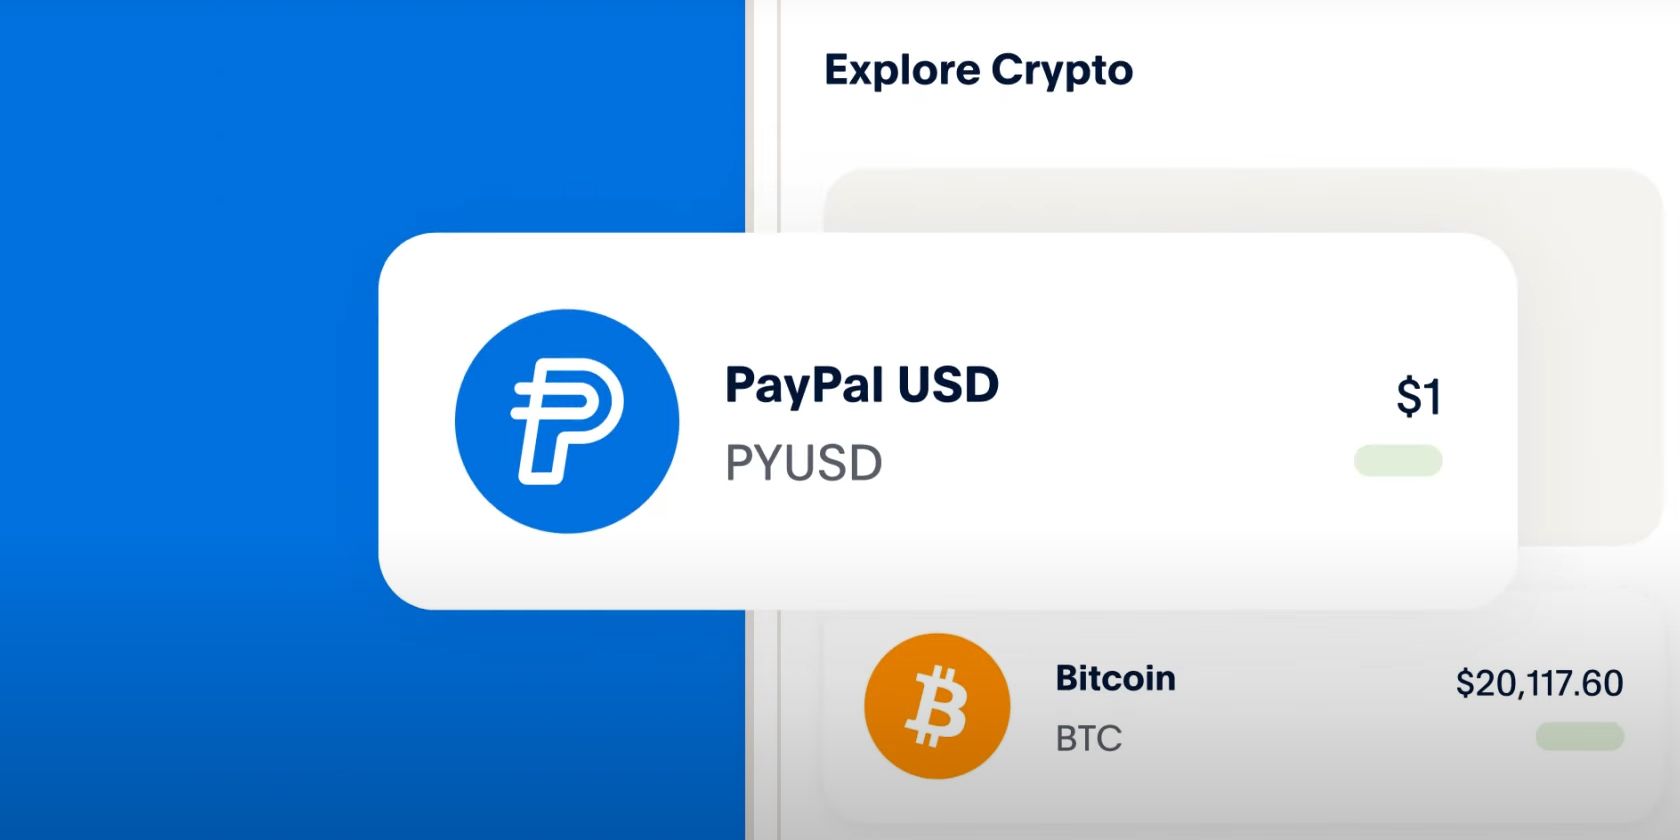 PayPal USD entry in a list of cryptocurrencies